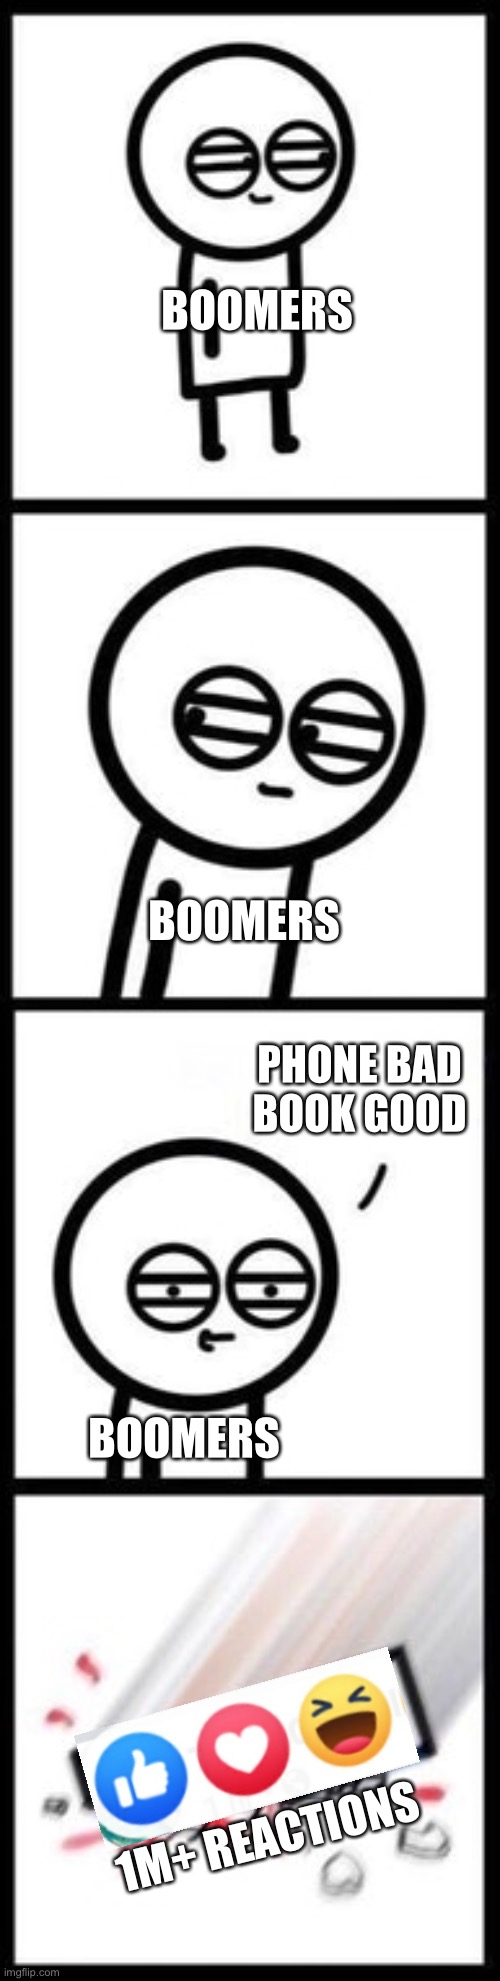 3251 upvotes | BOOMERS; BOOMERS; PHONE BAD
BOOK GOOD; BOOMERS; 1M+ REACTIONS | image tagged in 3251 upvotes,memes,boomer,boomers,funny,facebook | made w/ Imgflip meme maker